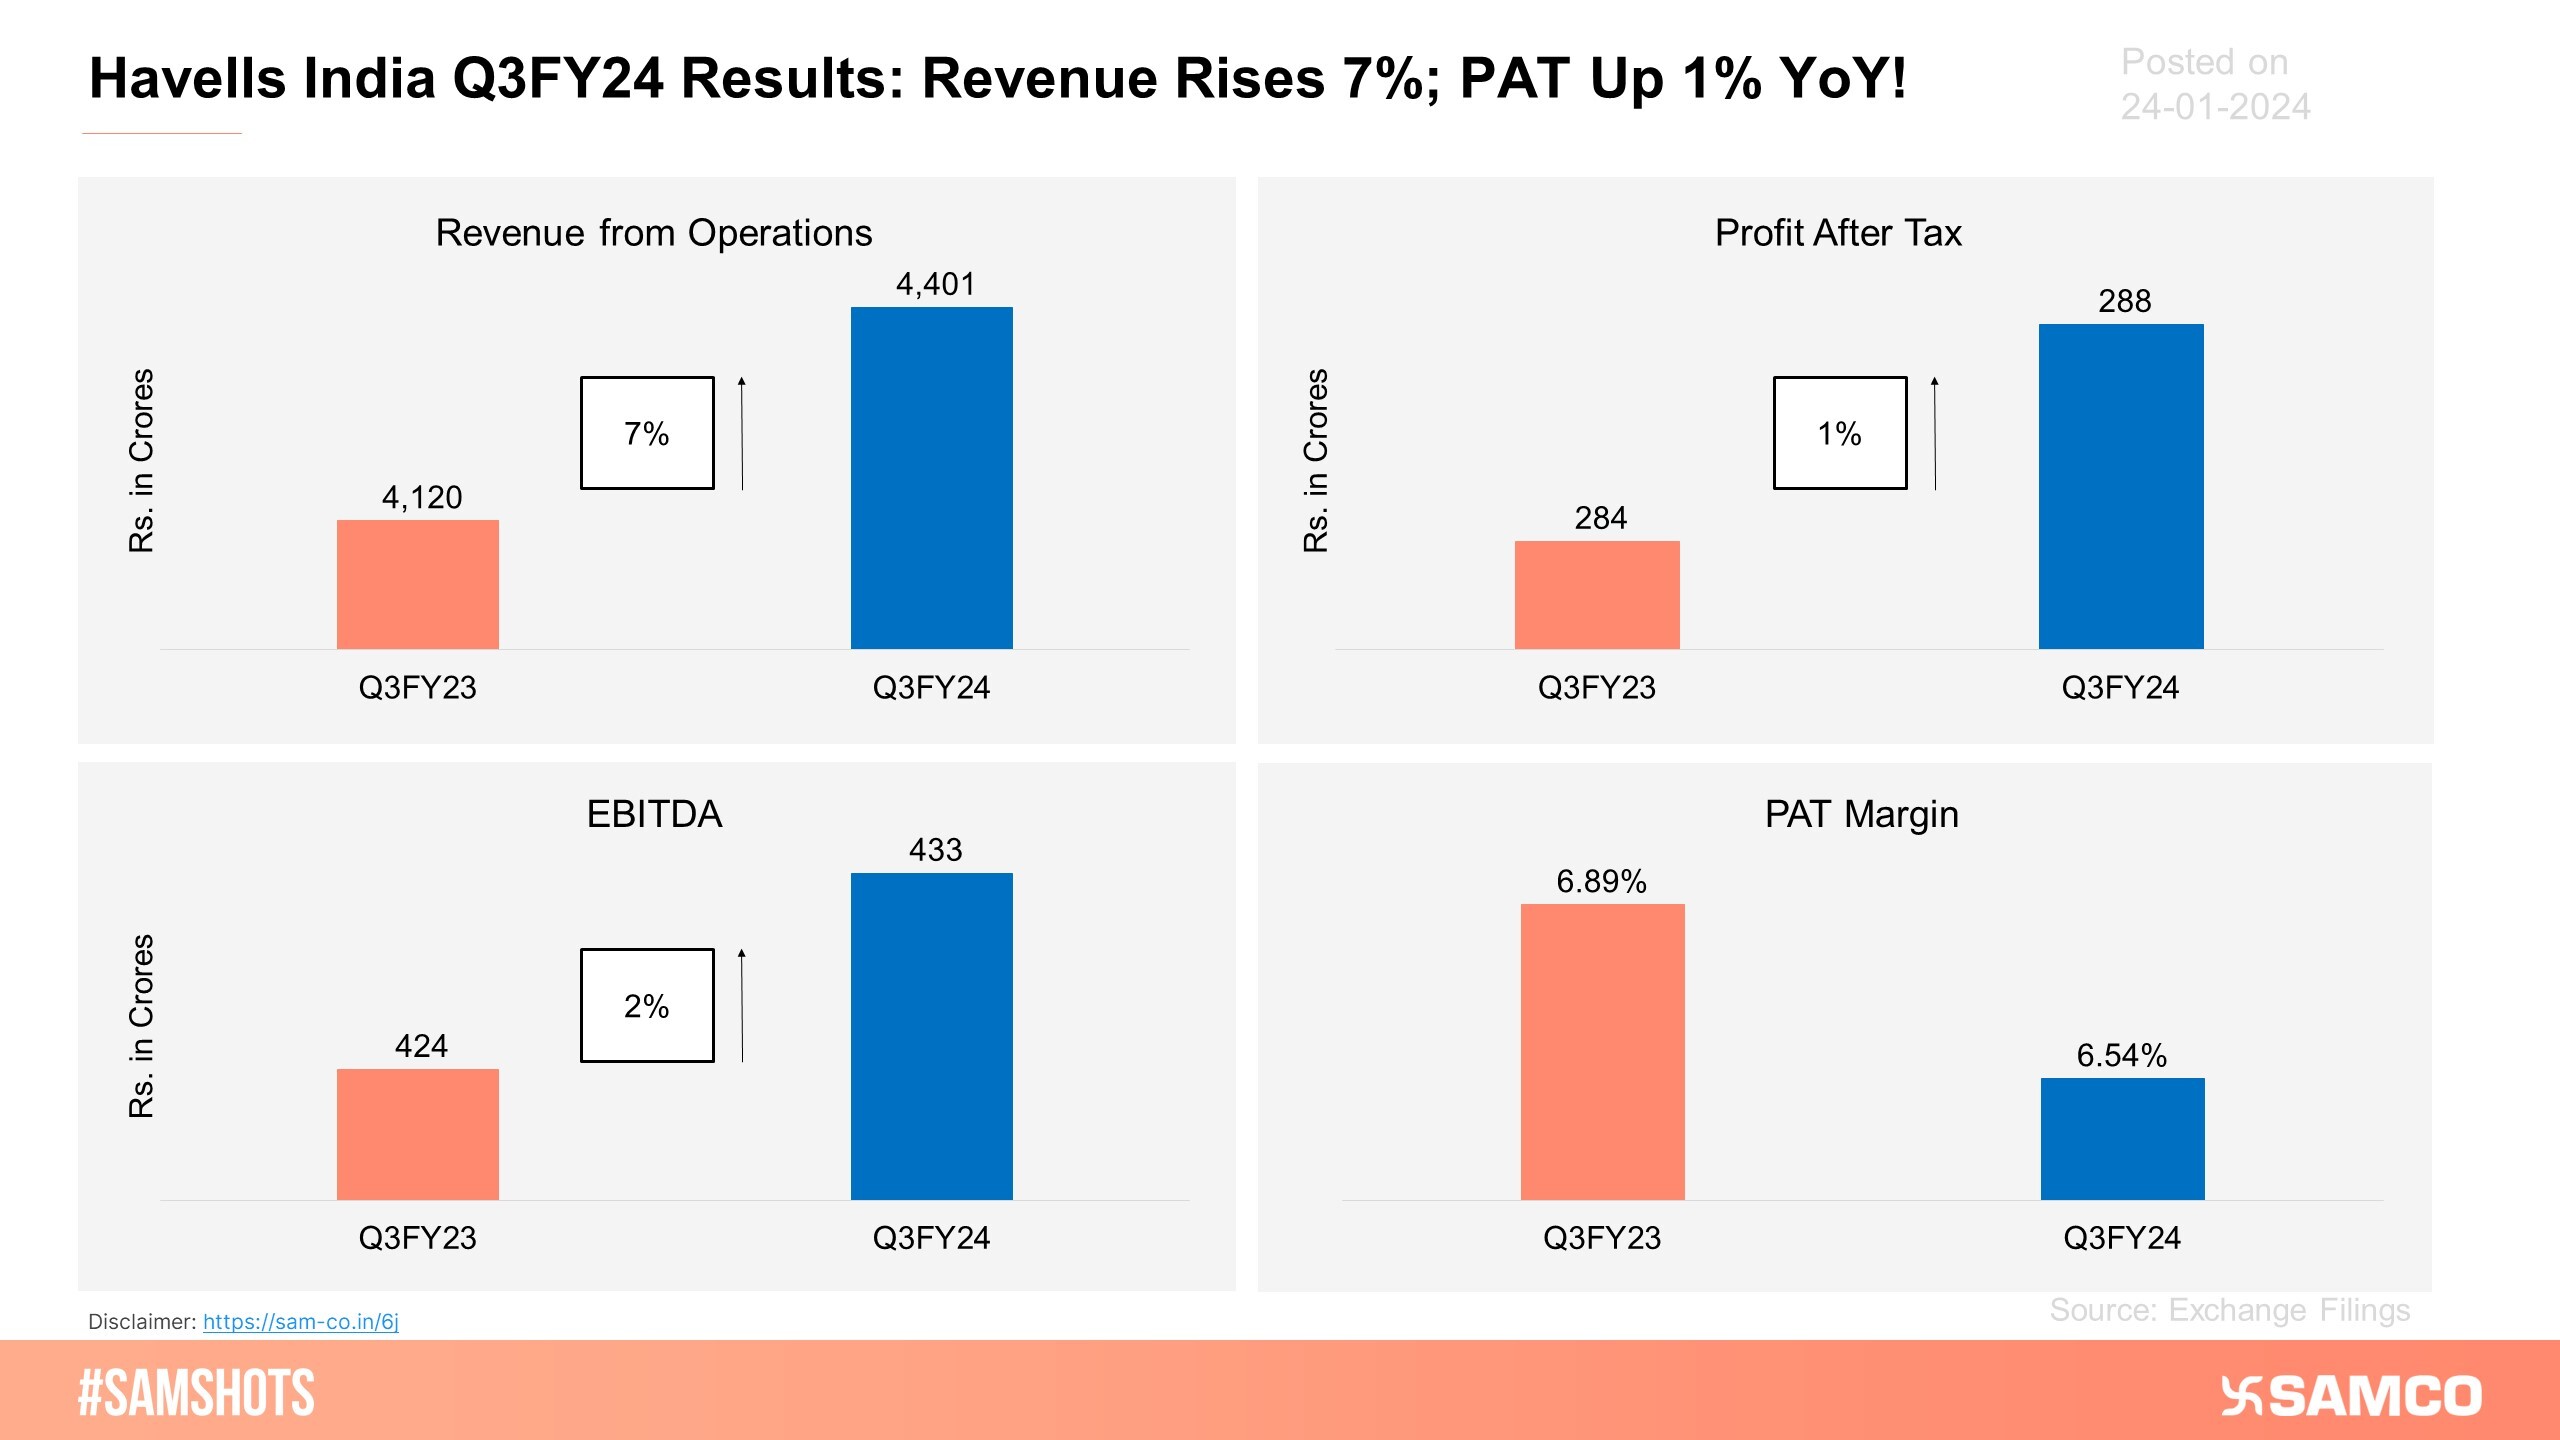 The chart indicates the financial performance of Havells India during Q3FY24.